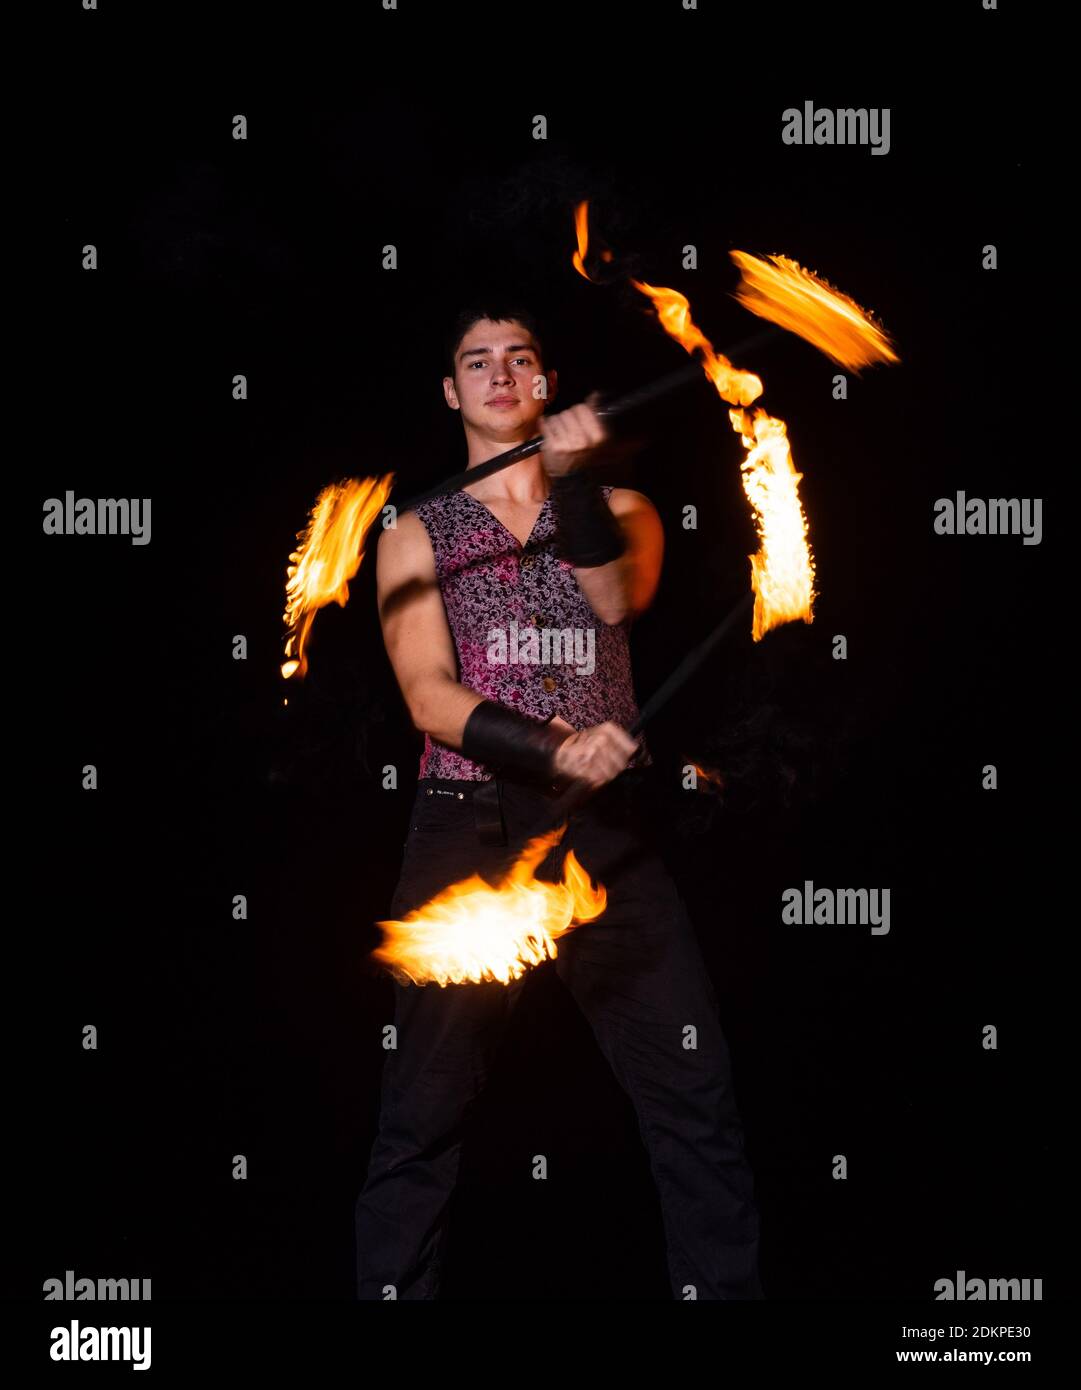 Burning energy. Handsome man juggle flaming batons. Fire juggling. Fire energy. Energetic twirling. Flame and sparks. Night performance. Amusement show. Light up and juggle. Stock Photo